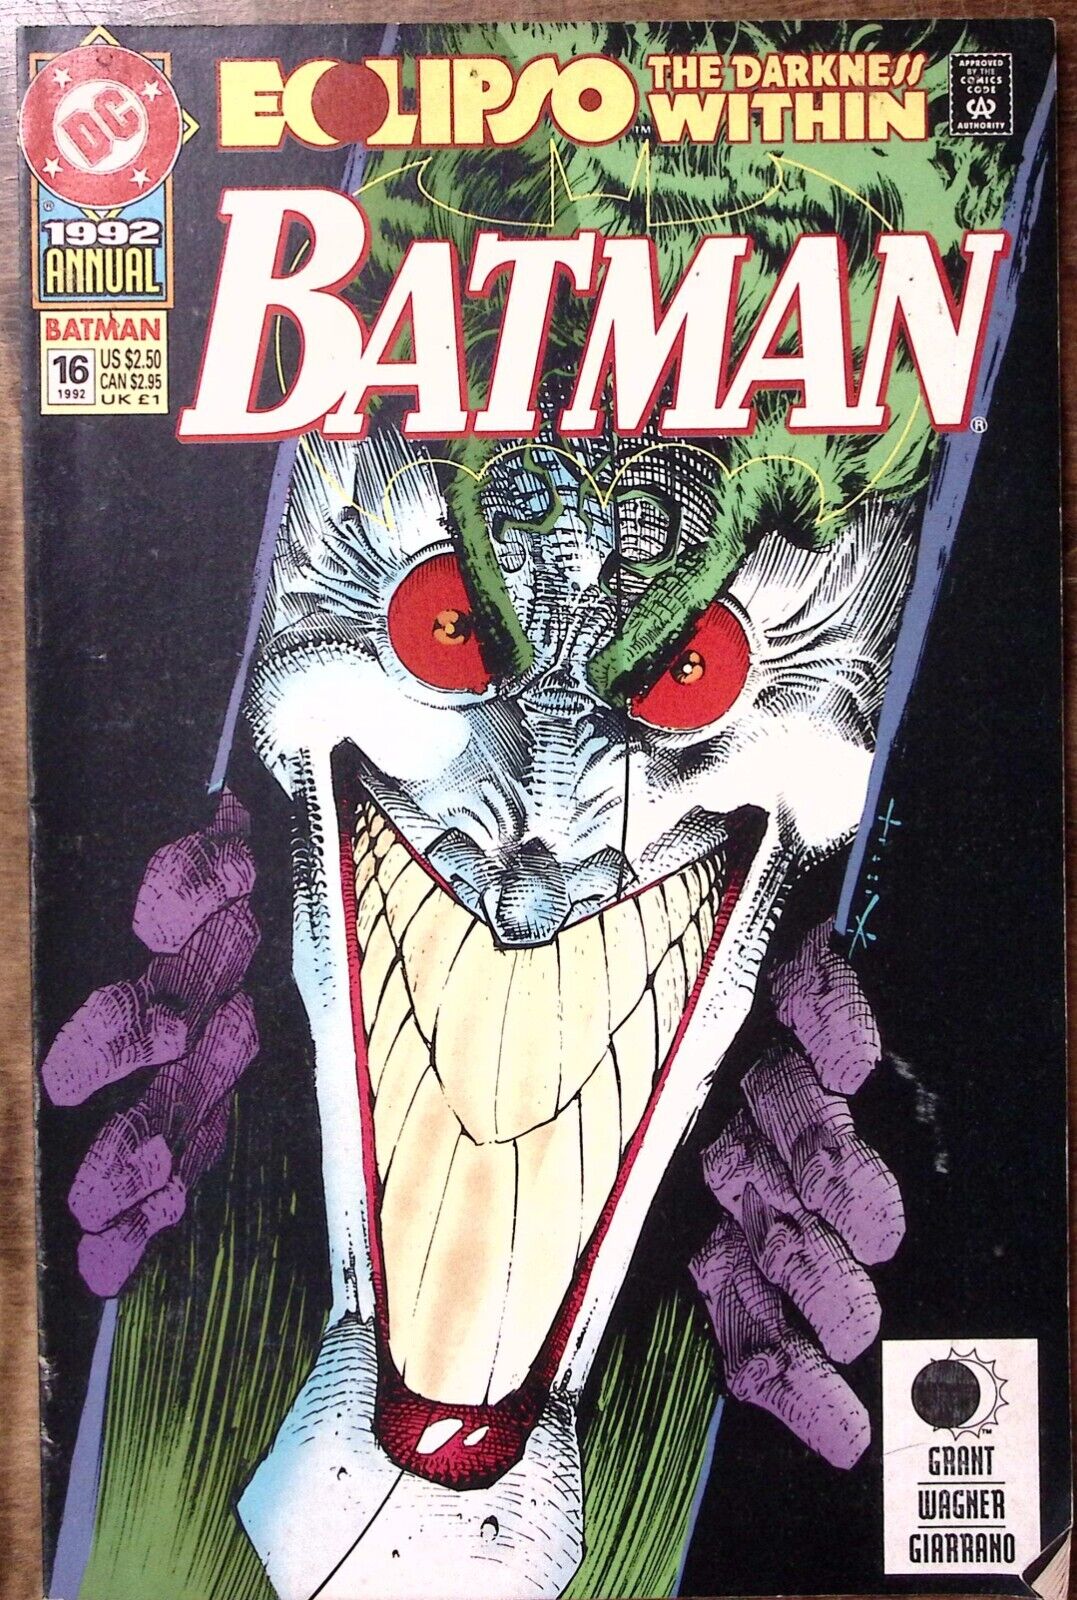 1992 BATMAN ANNUAL #16 ECLIPSO THE DARKNESS WITHIN DC COMICS Z4866